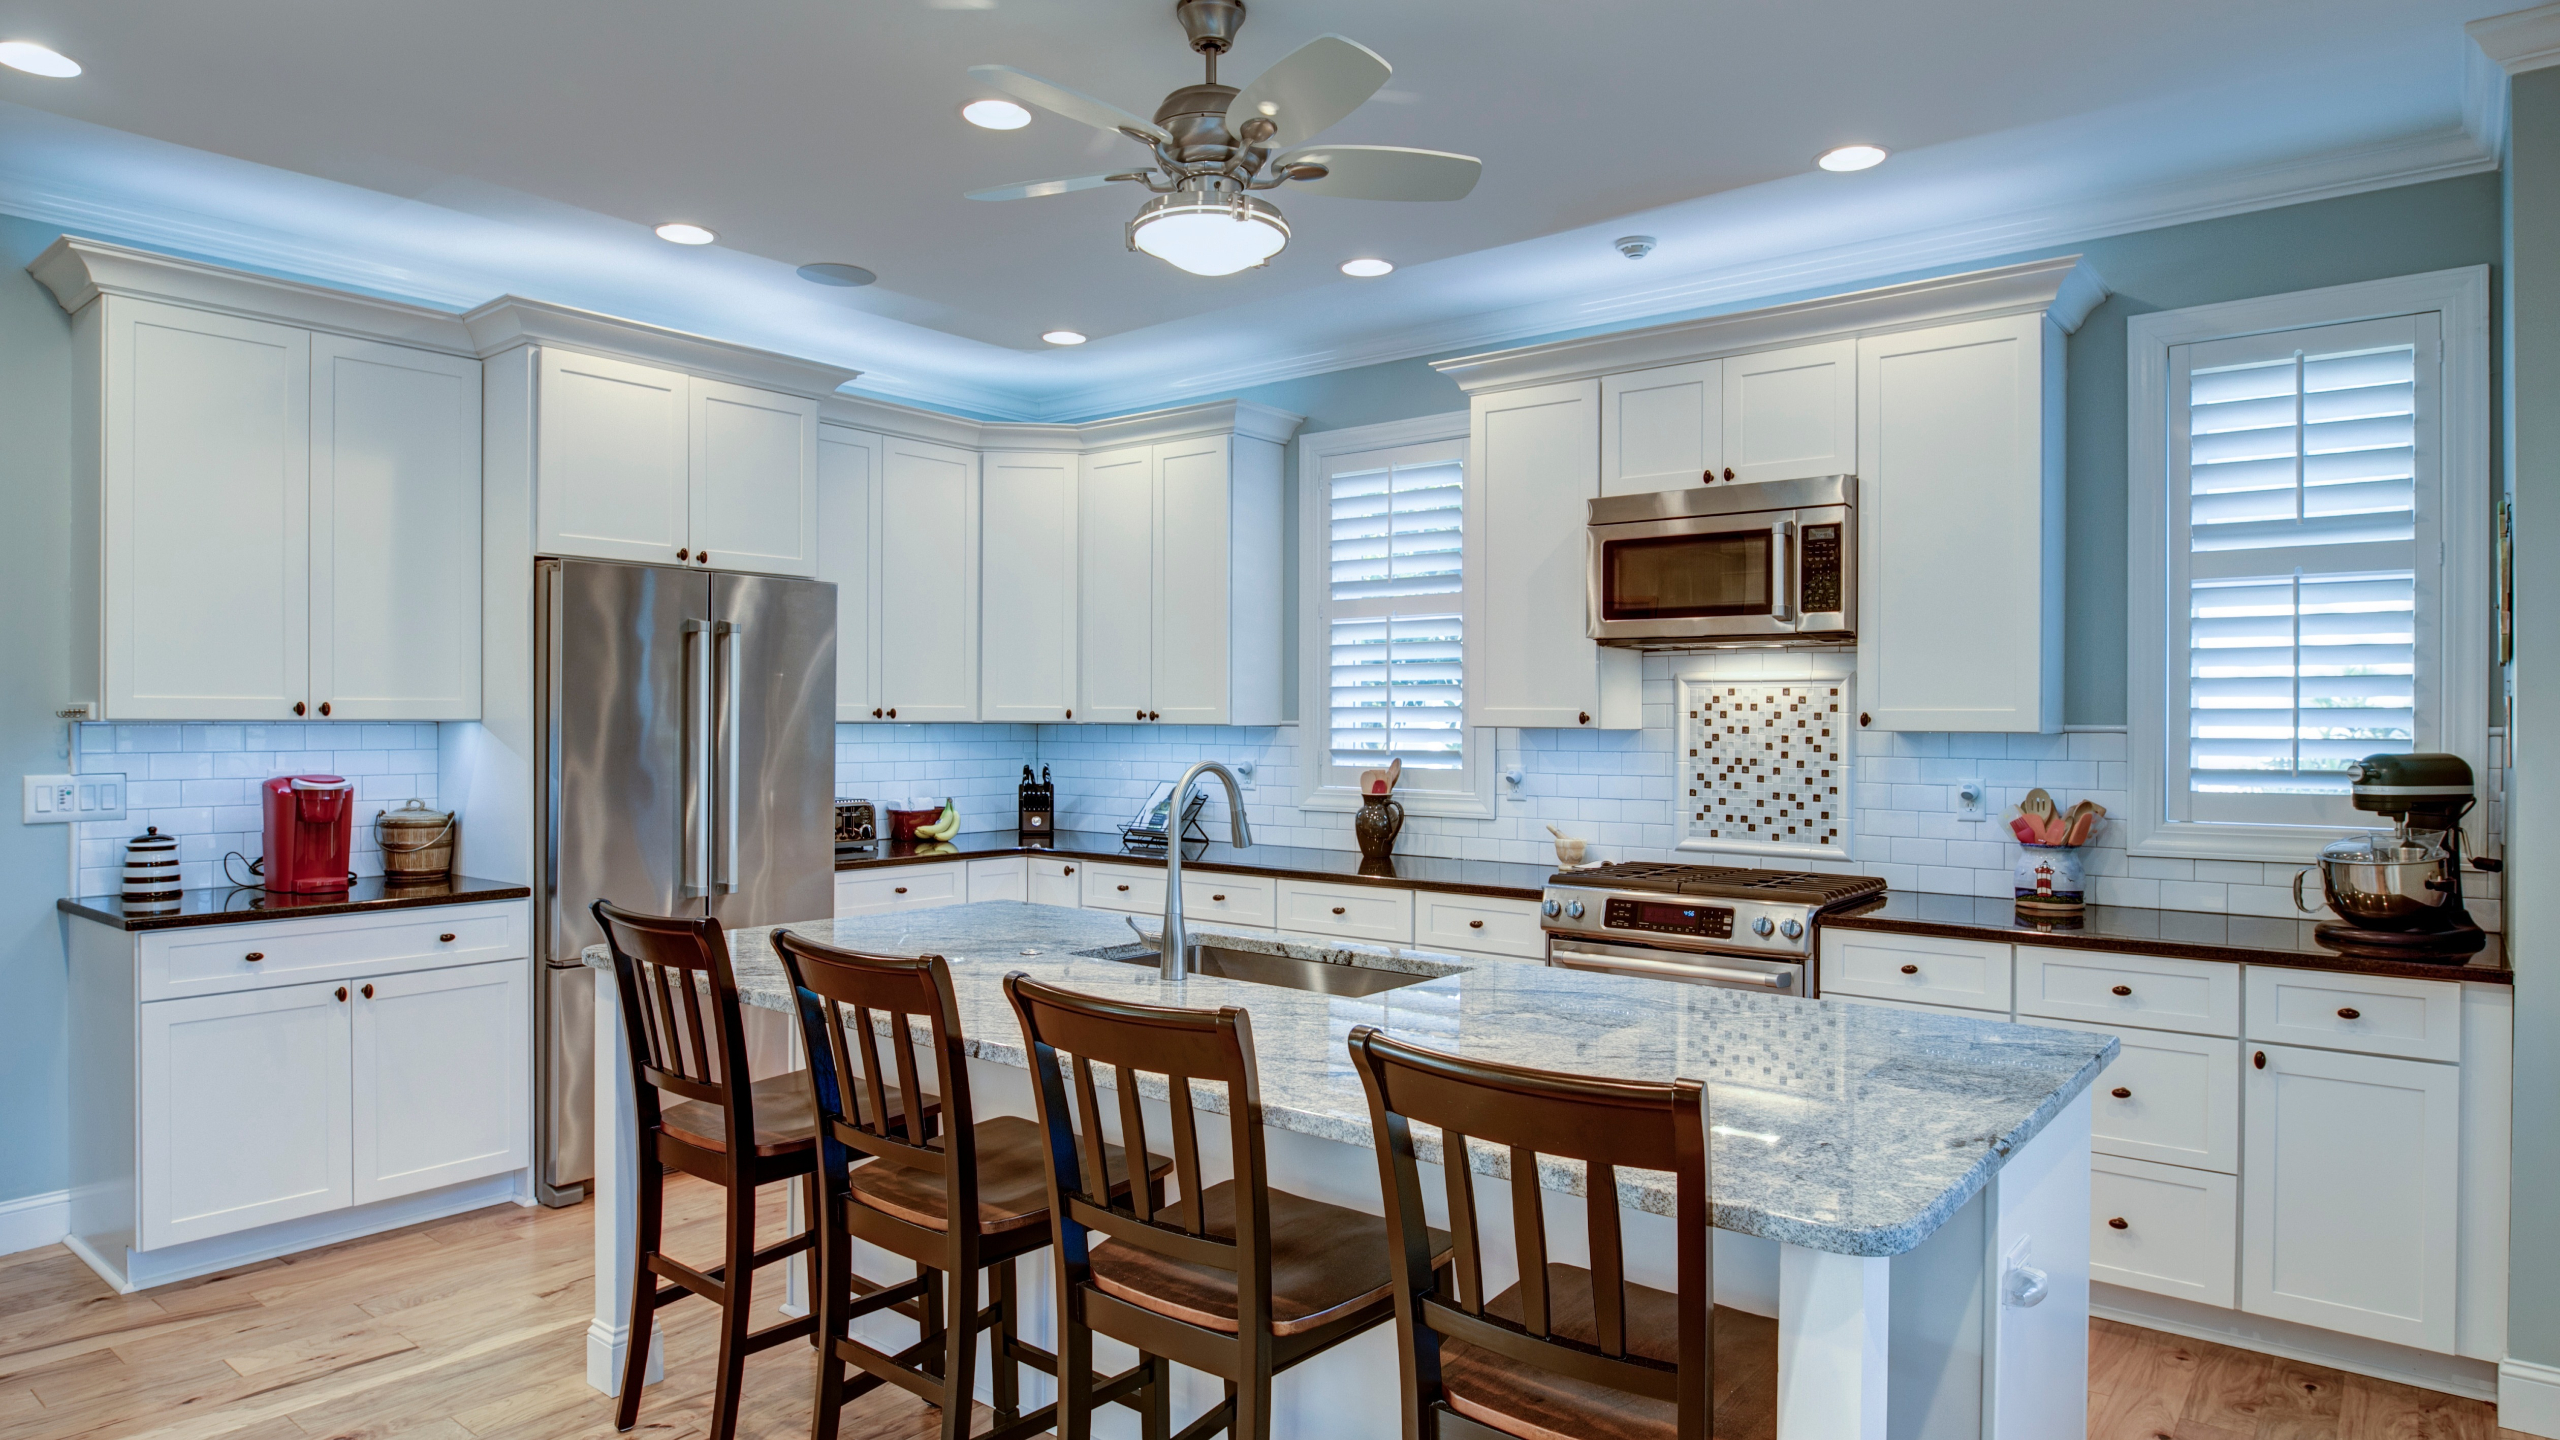 All-white kitchen with an island and silver appliances, and brown wood chairs